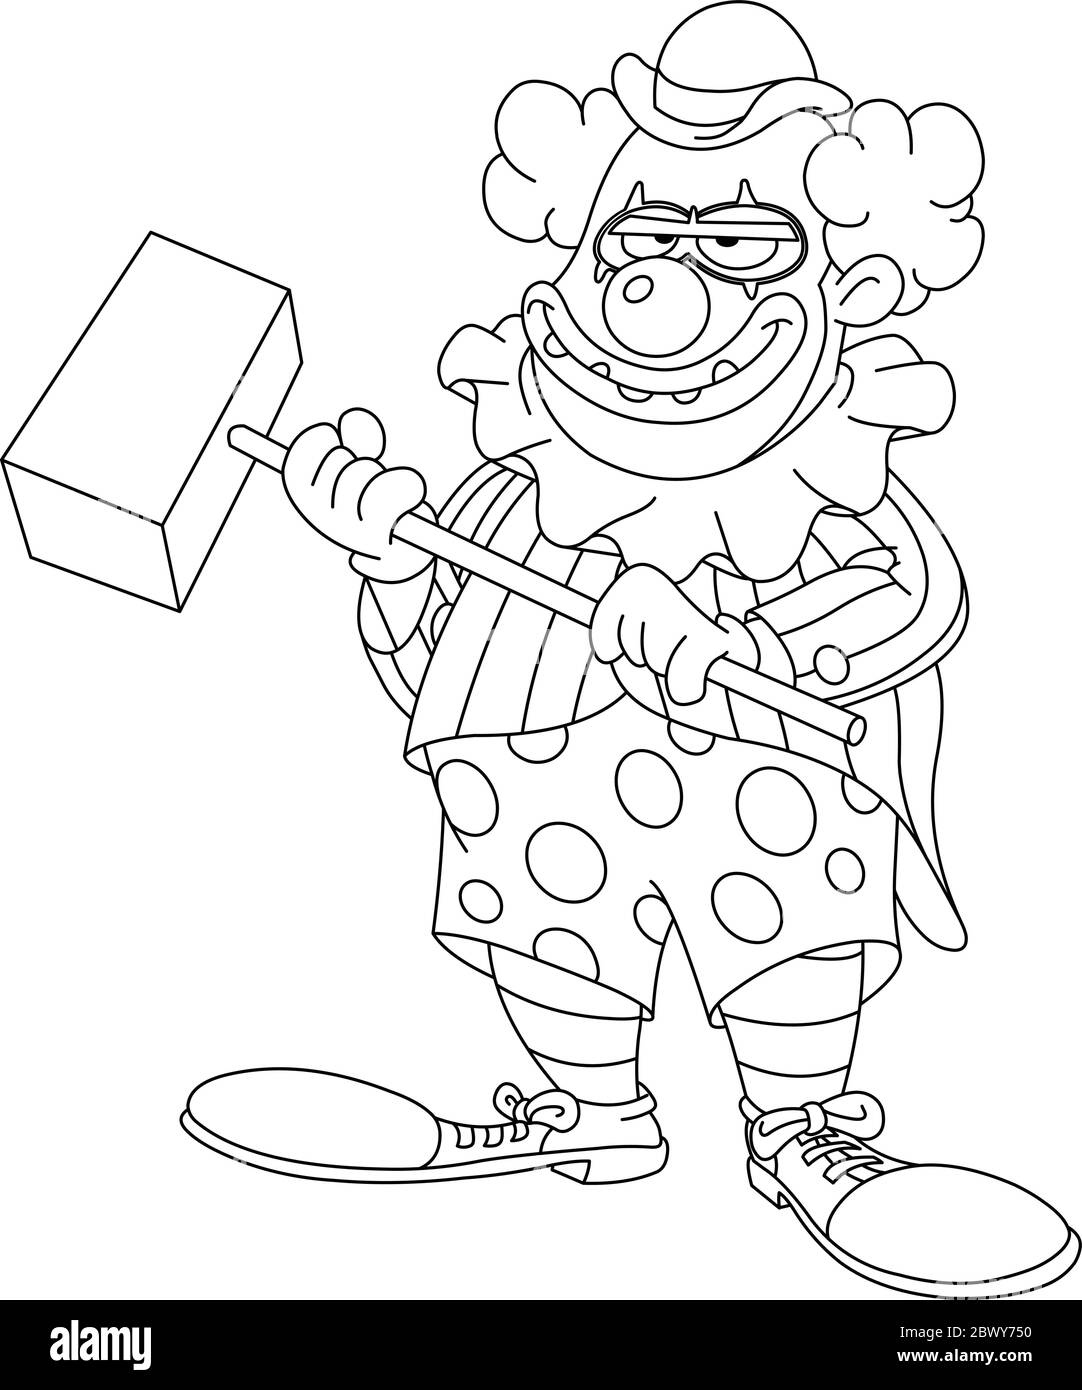 coloring pages of scary clowns